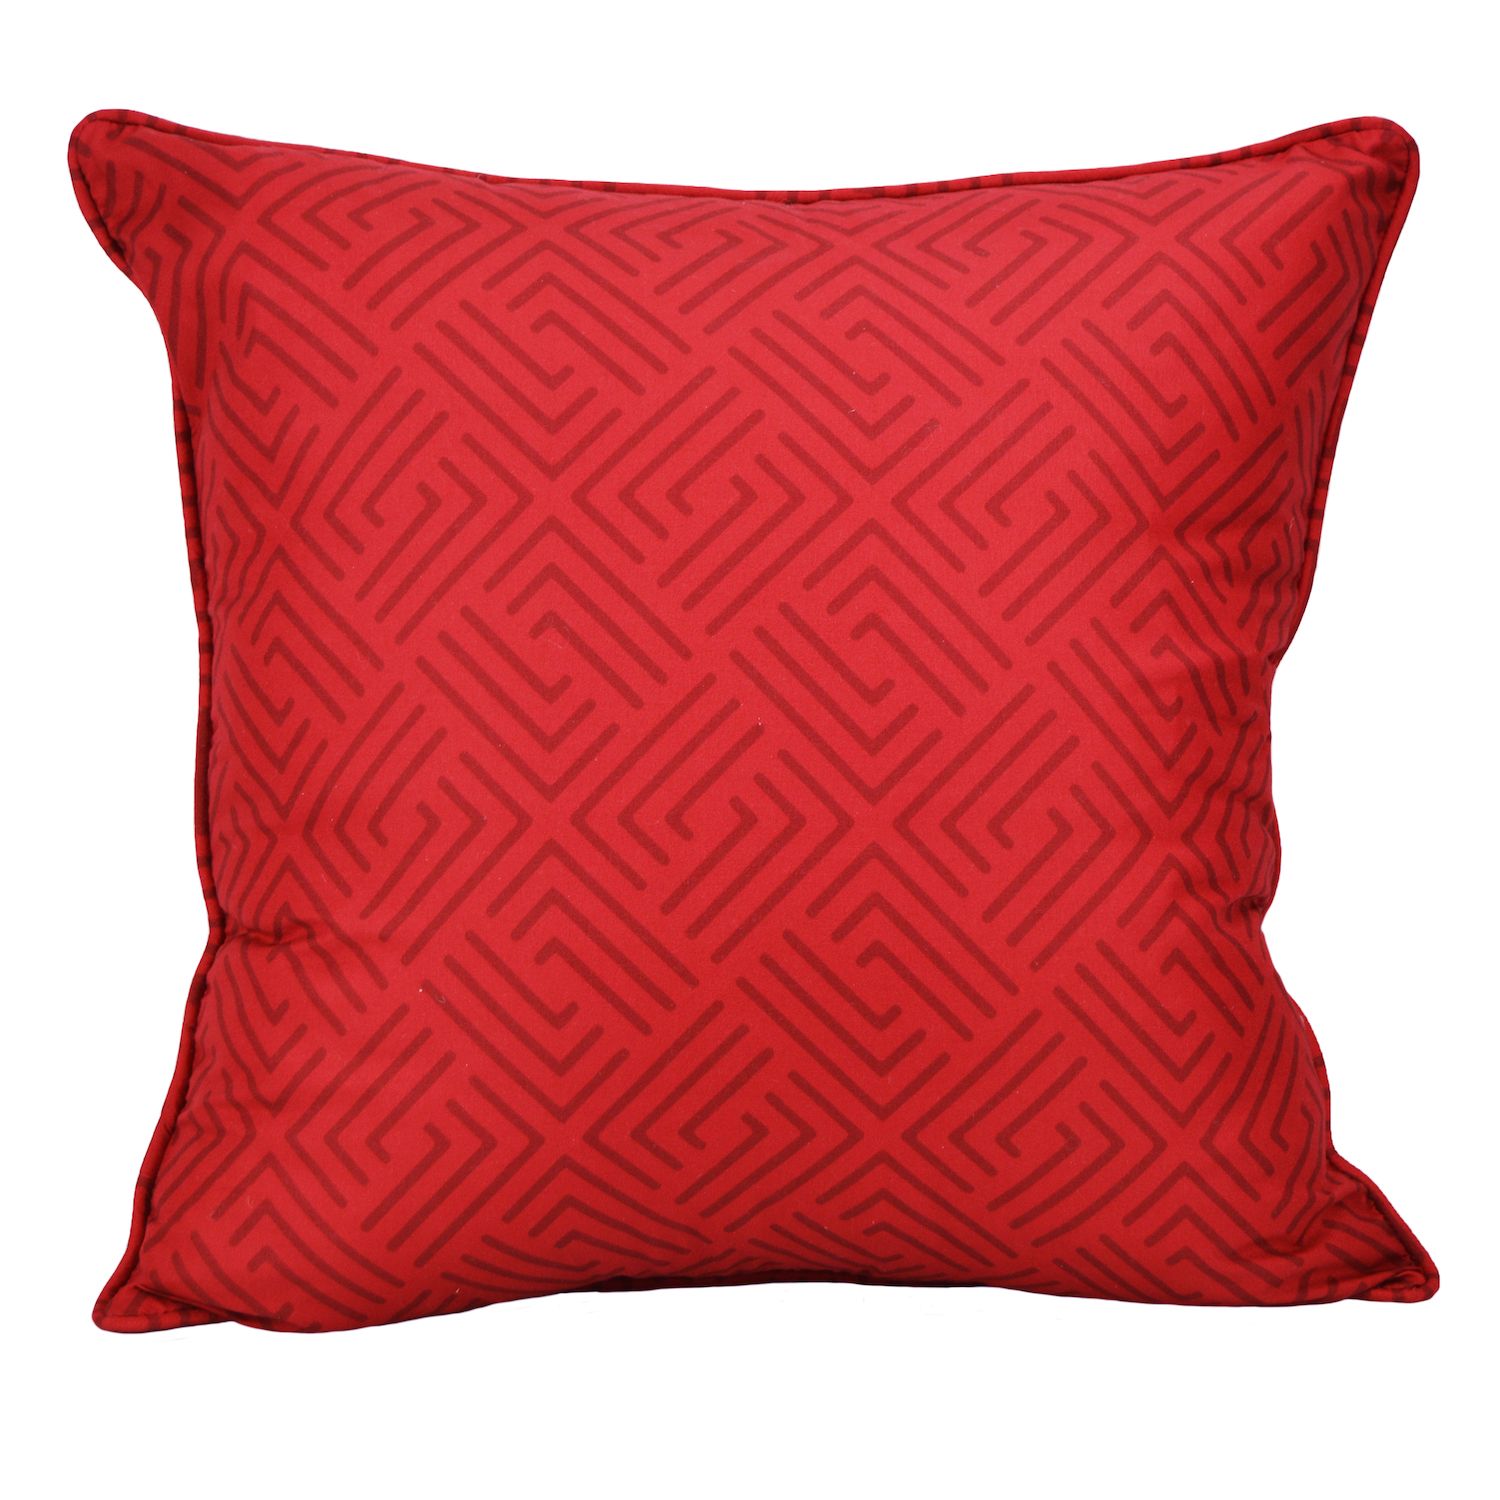 Image for Donna Sharp Tis the Season Red Pillow at Kohl's.